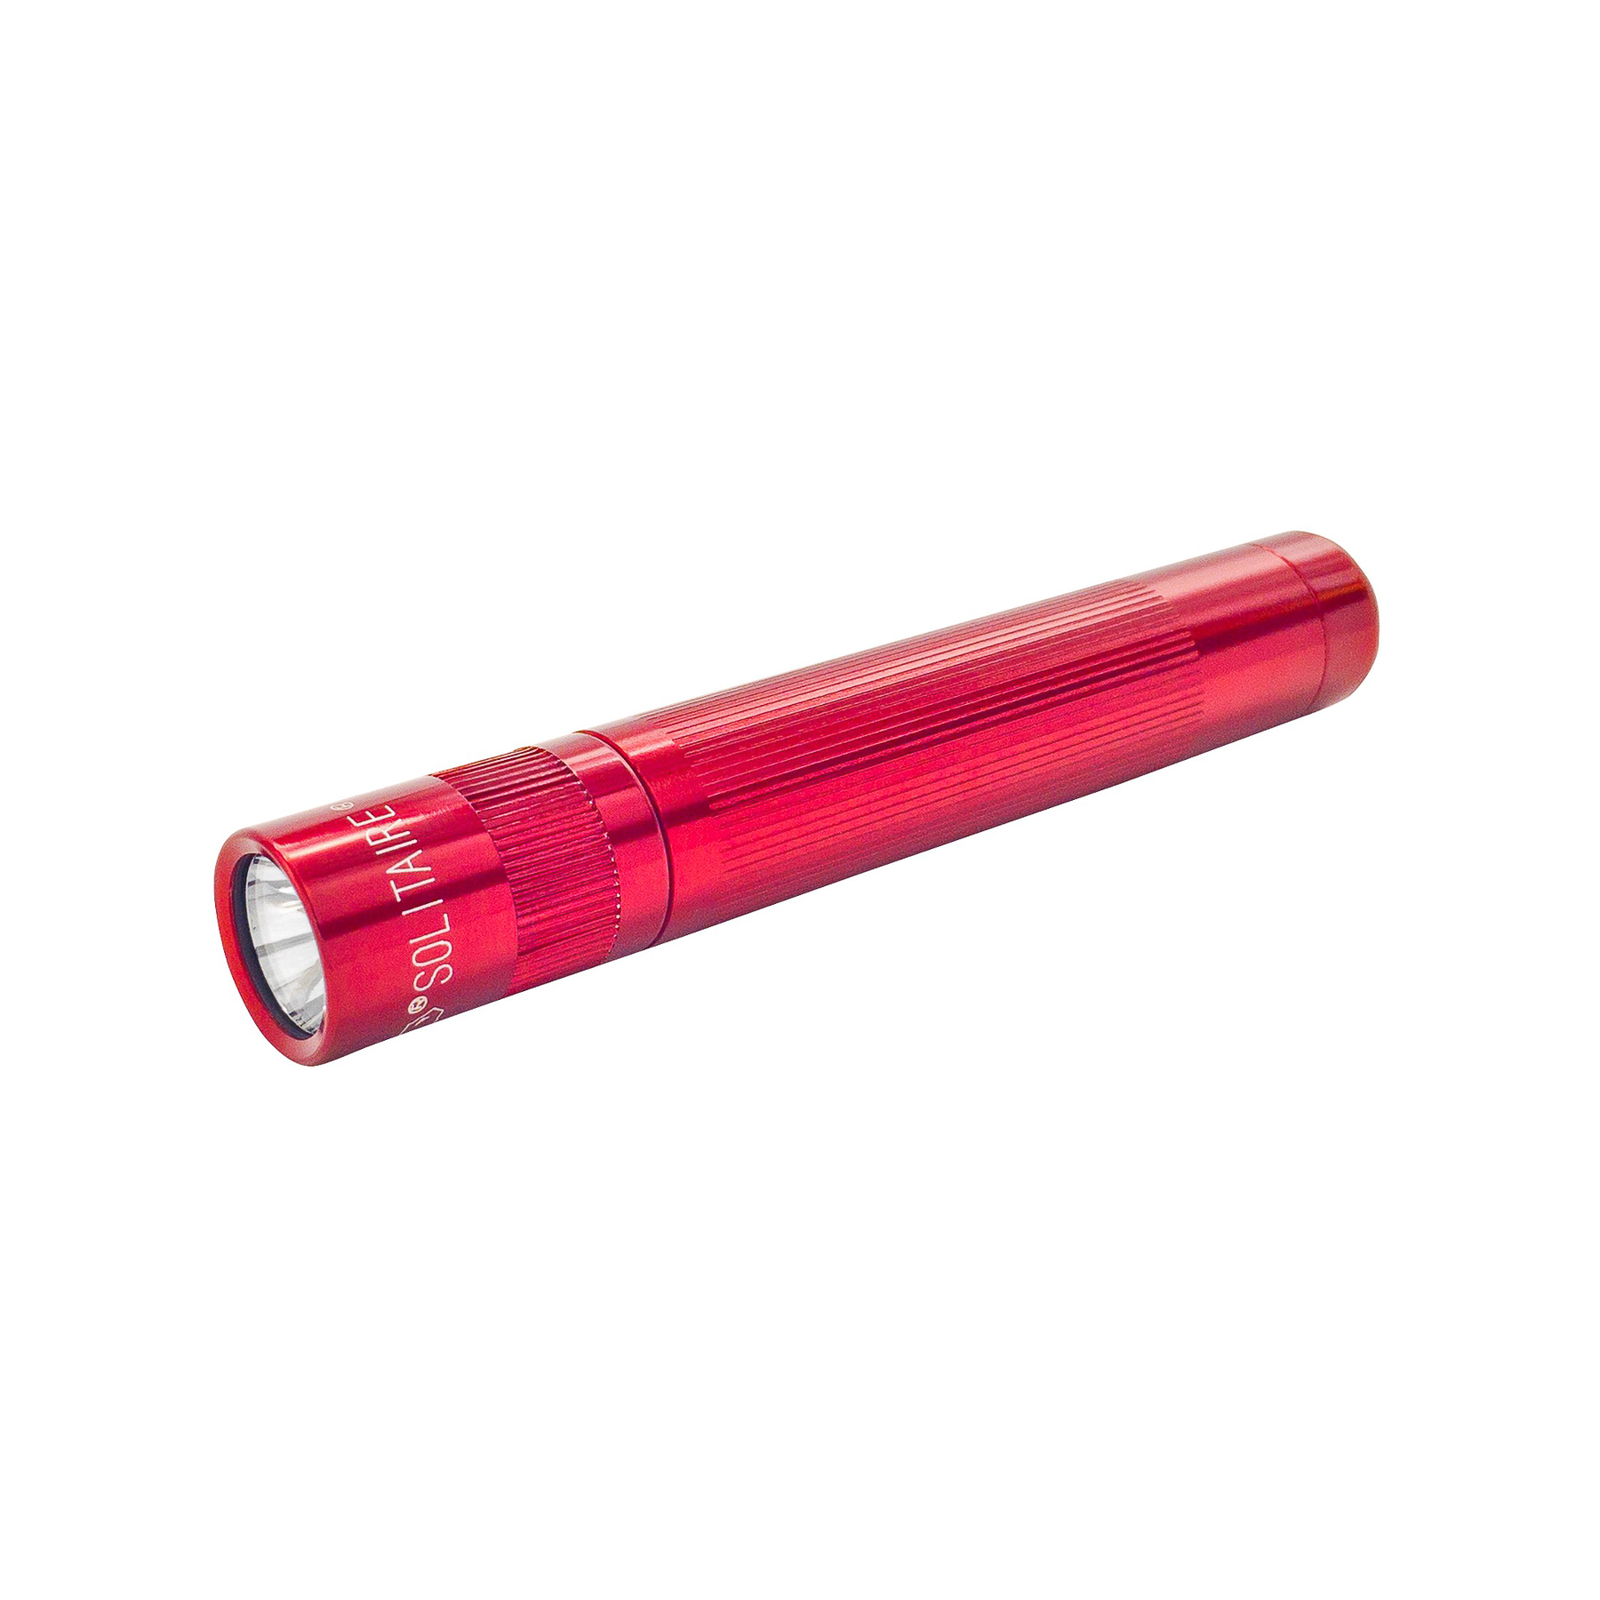 Maglite Xenon torch Solitaire 1-Cell AAA red